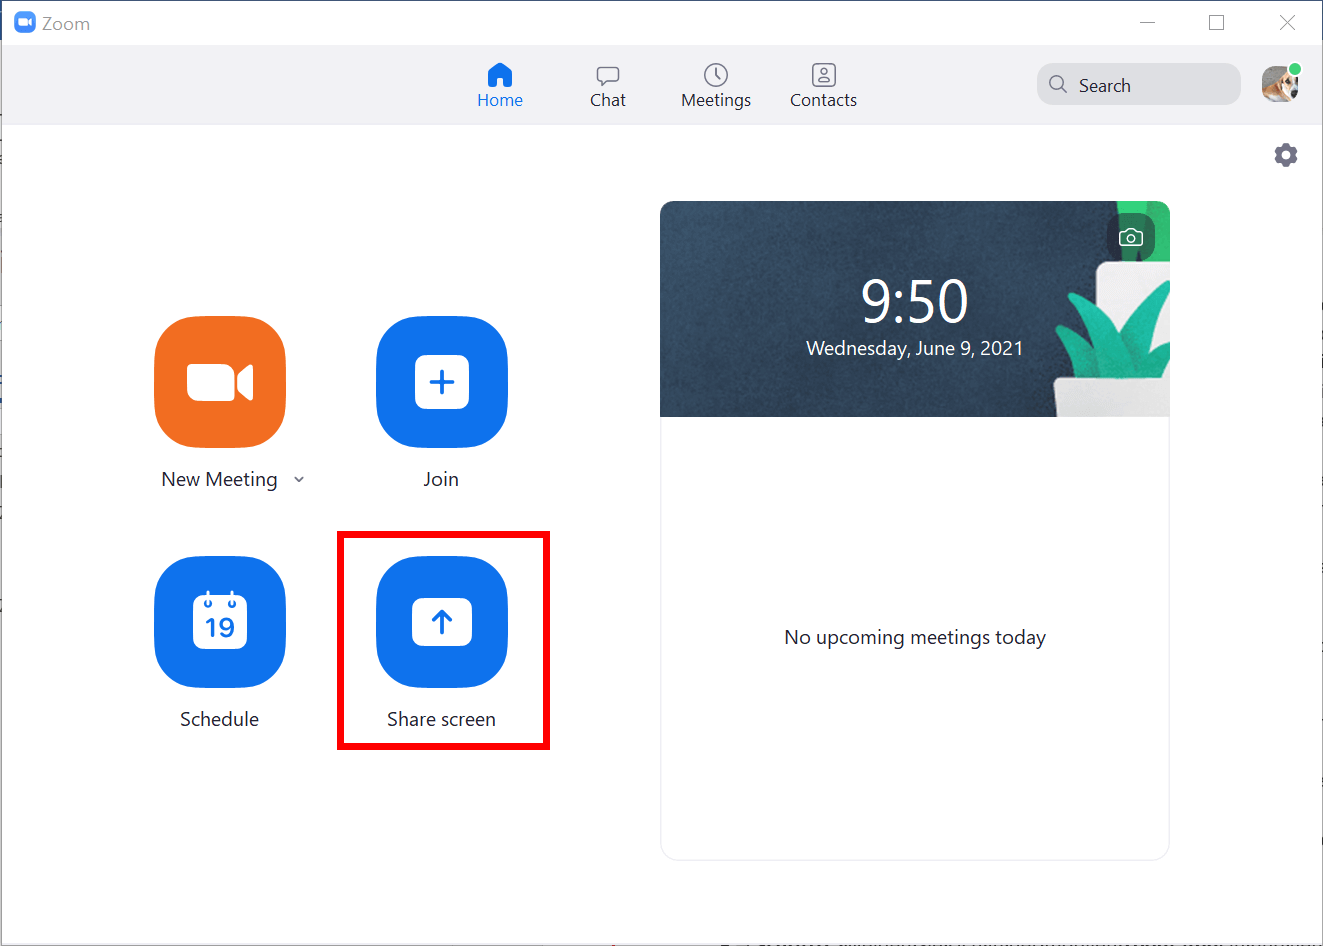 Start menu of Zoom with the sharing screen feature